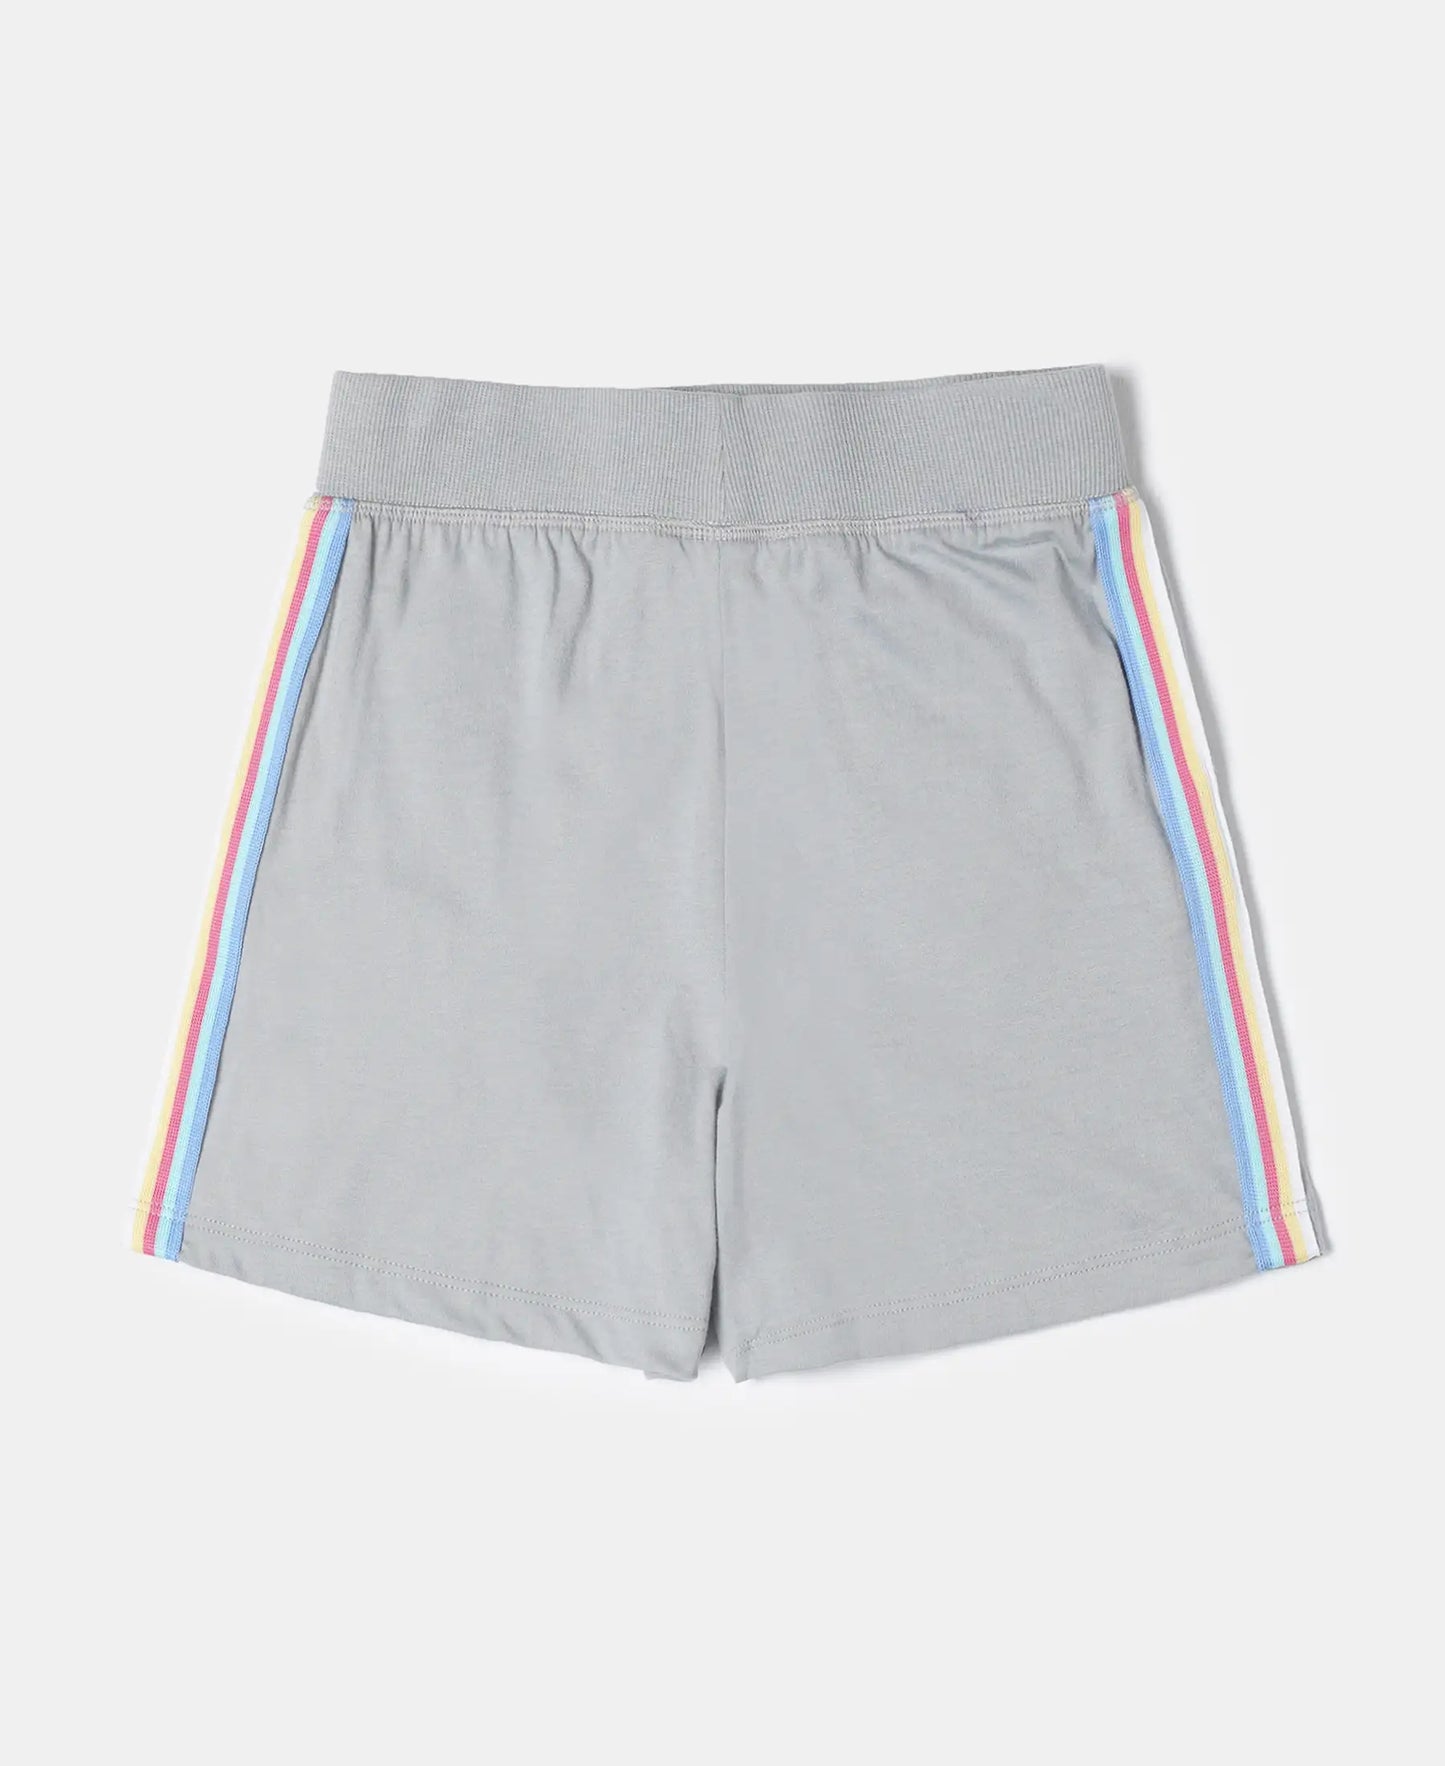 Super Combed Cotton Solid Shorts with Side Taping - Quarry-2